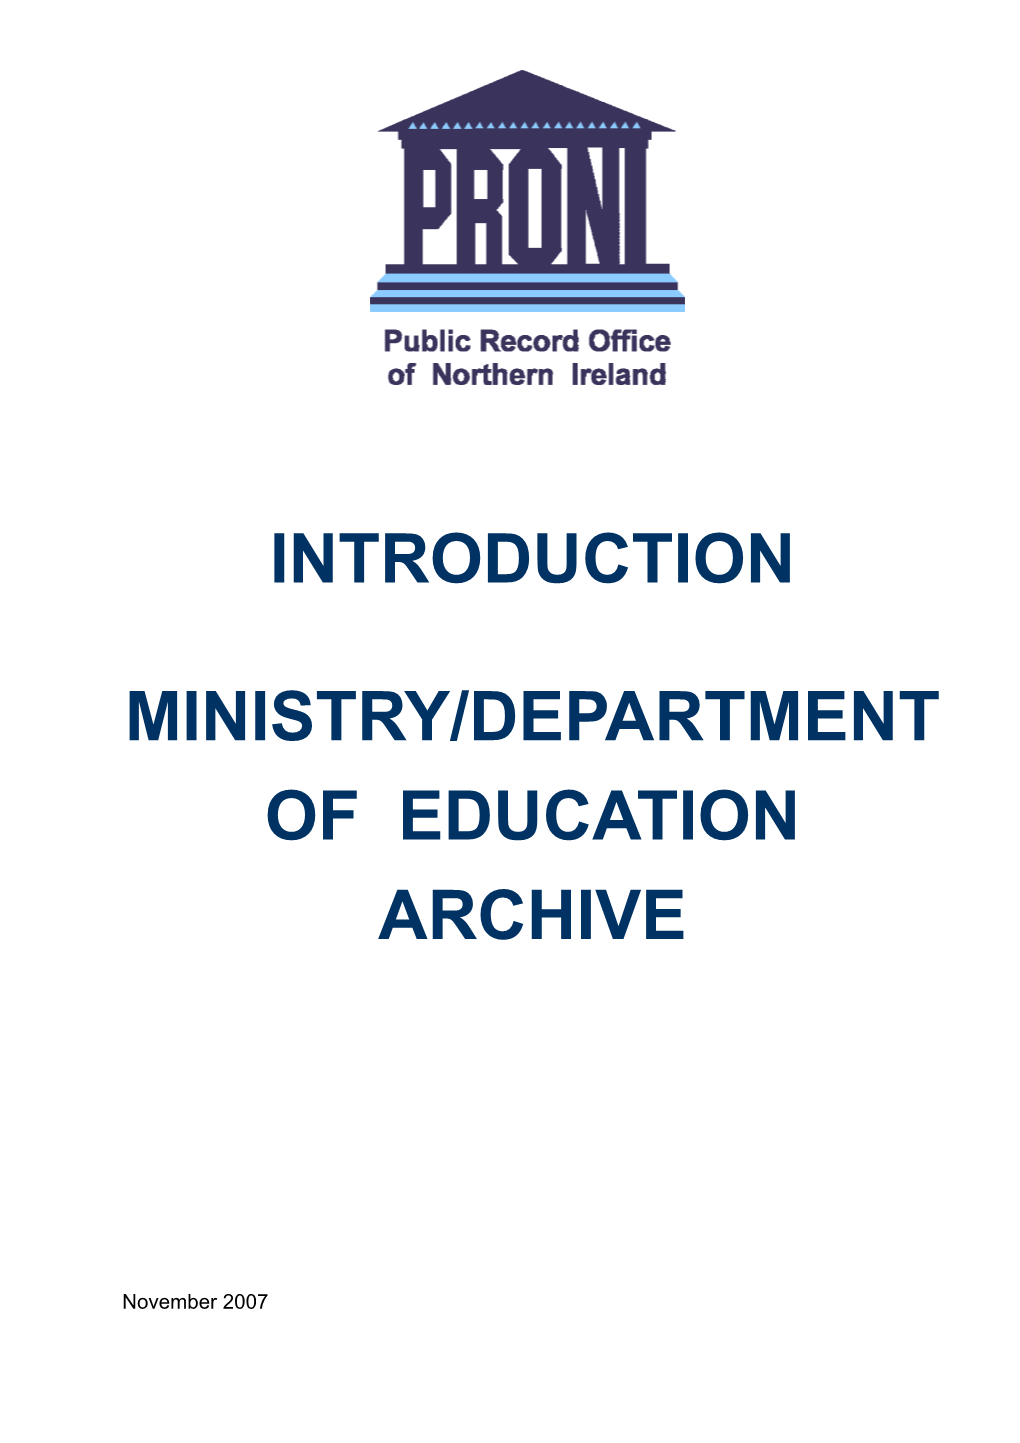 Introduction to the Ministry/Department Of